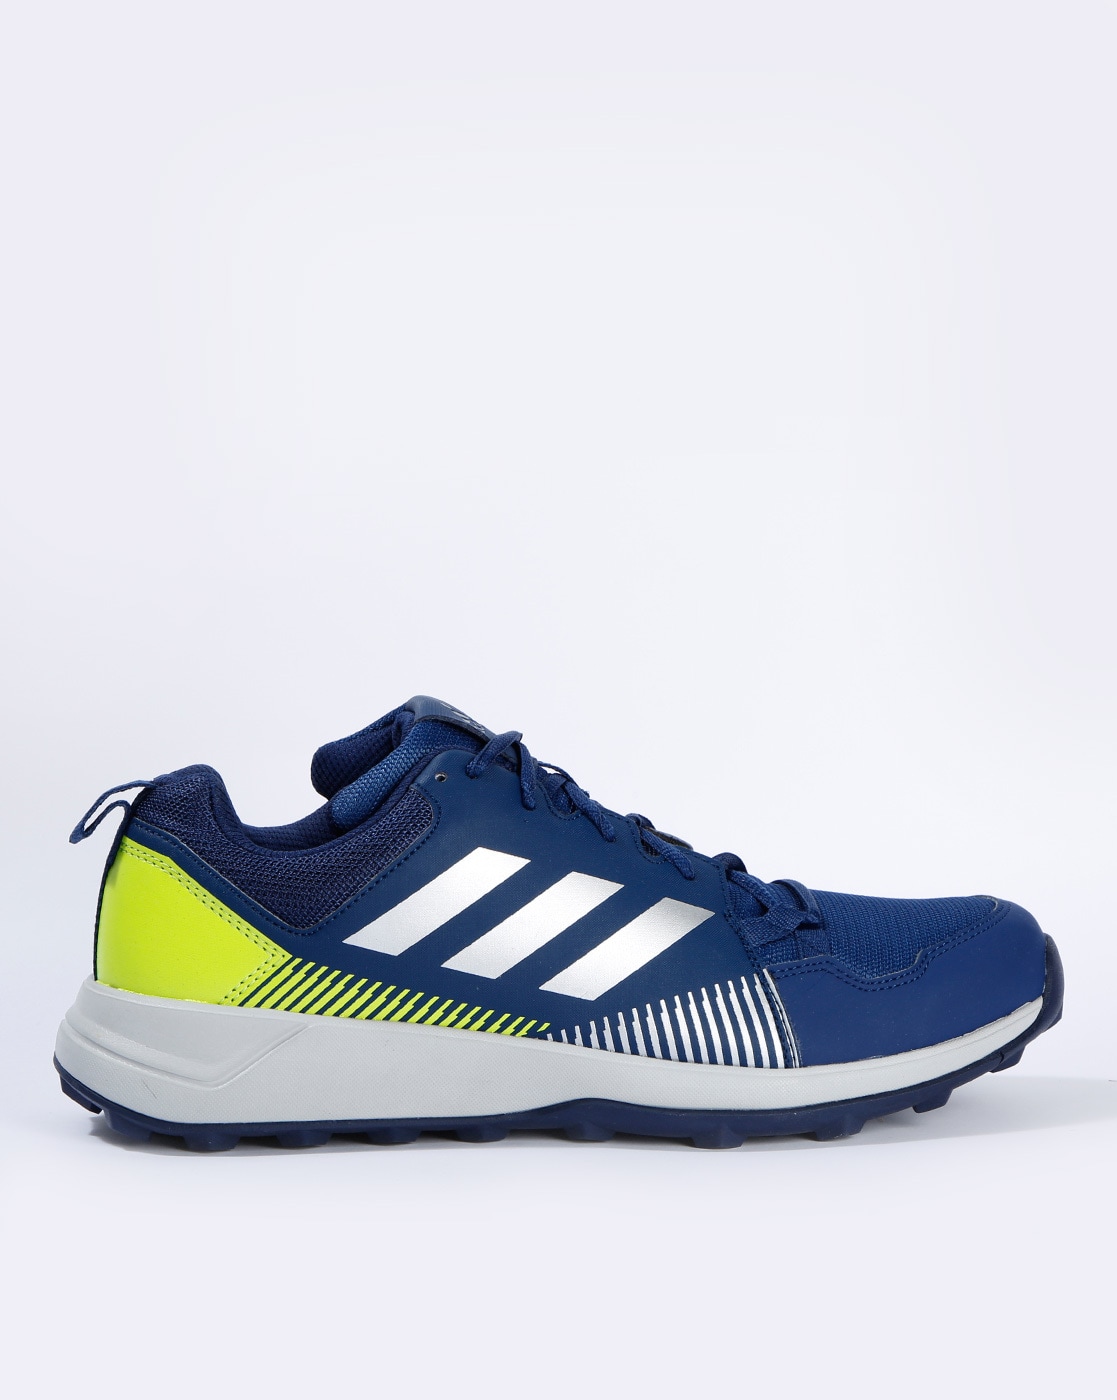 adidas tell path outdoor shoes